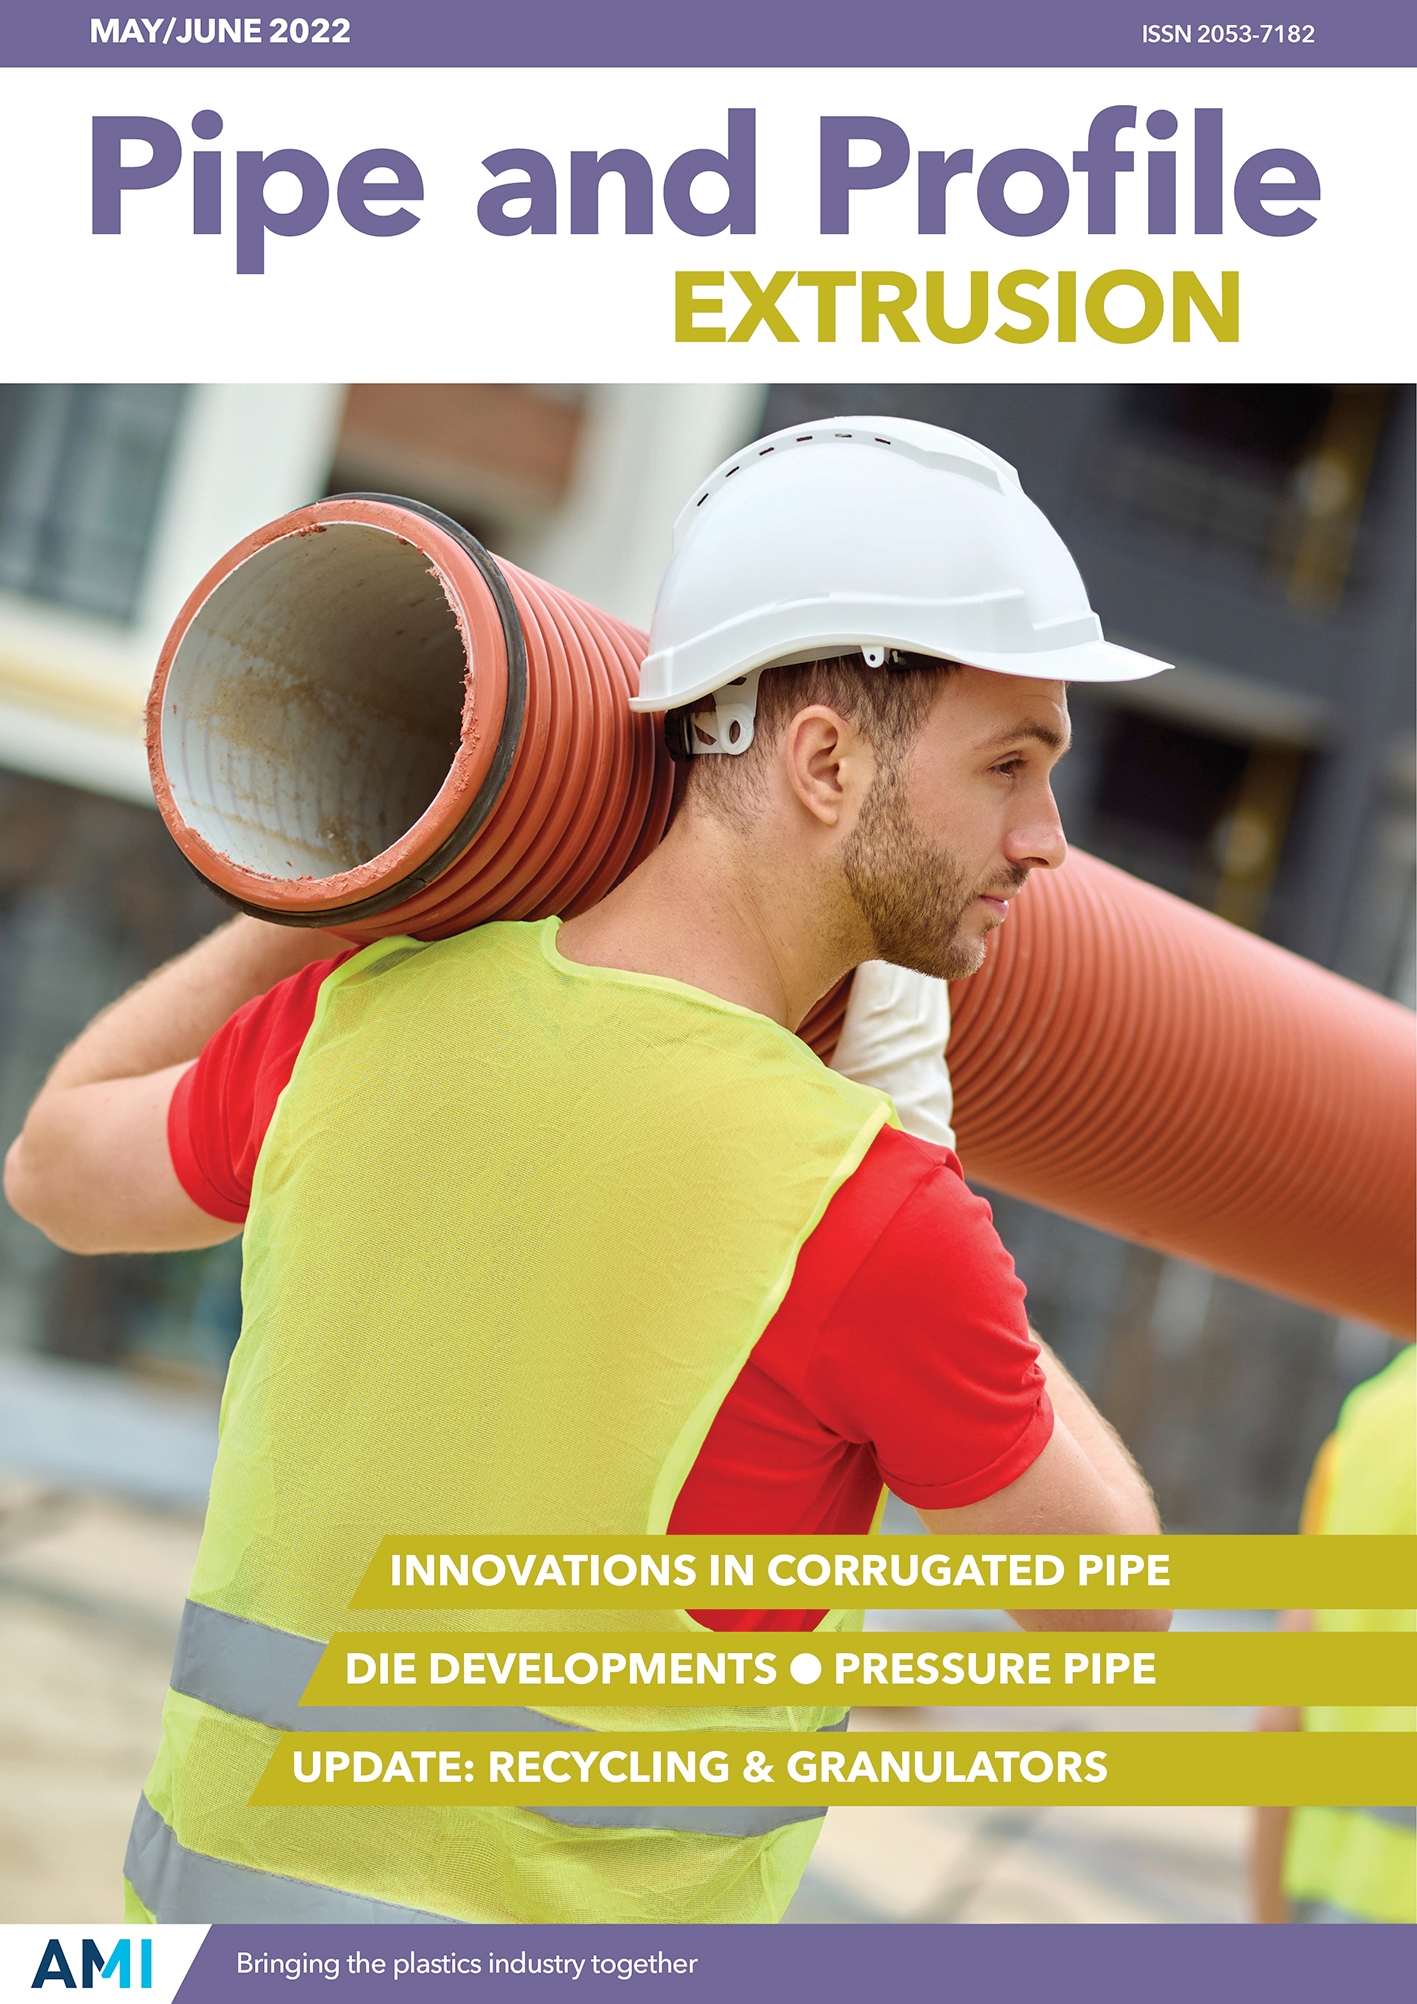 Pipe and Profile Extrusion May/June 2022